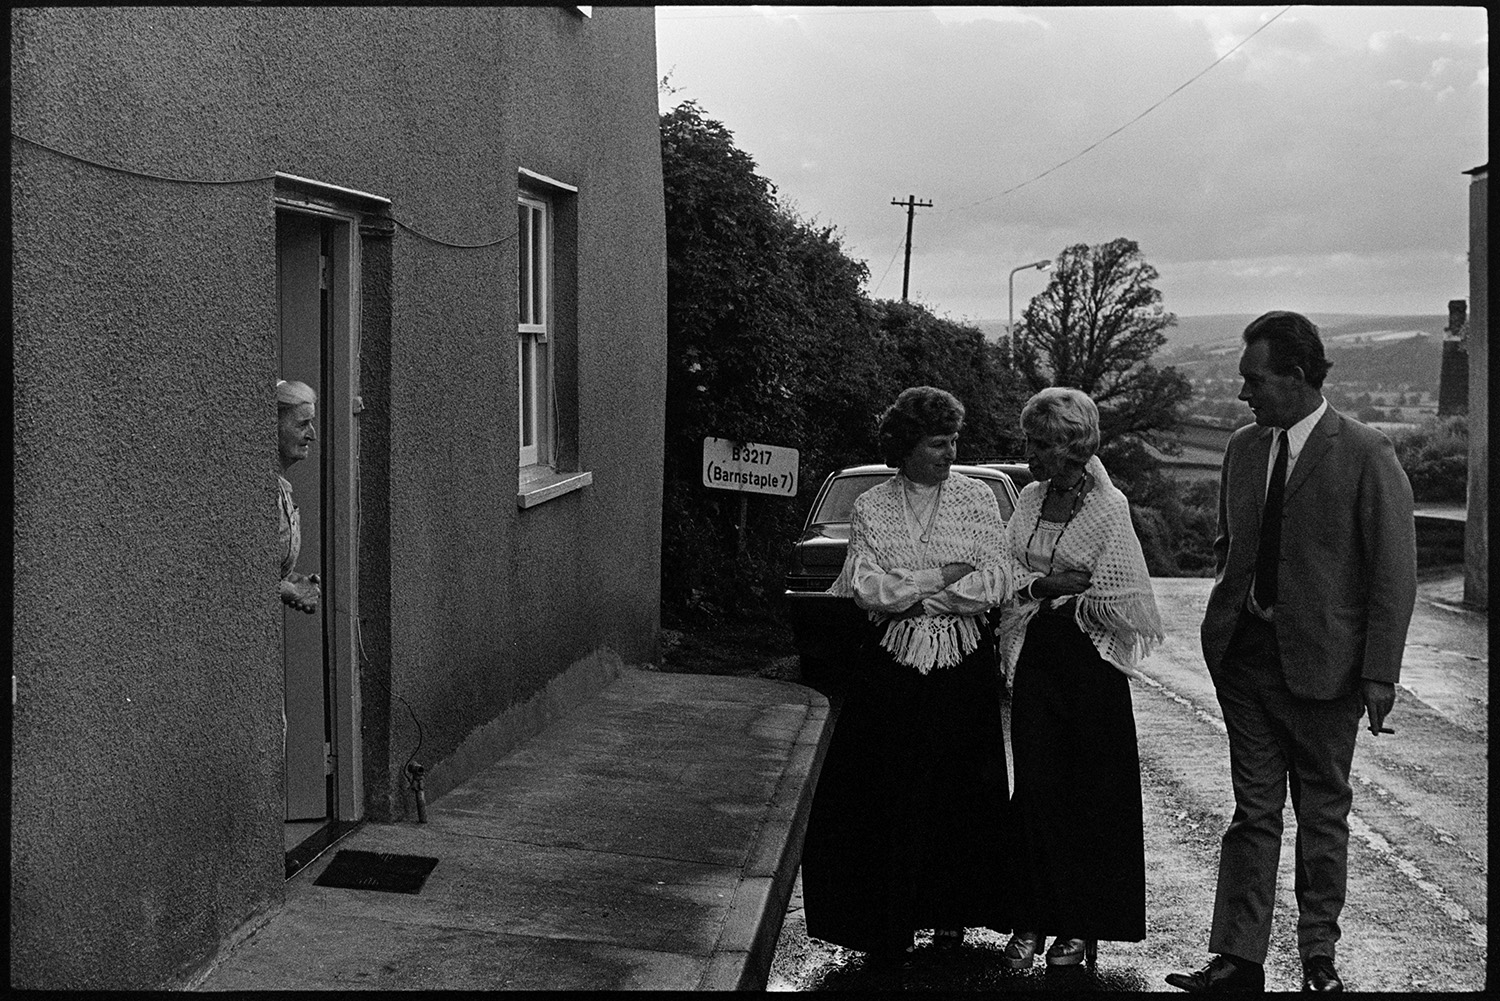 Bandsmen and choir ladies in street. 
[Two women wearing shawls, and a man wearing a suit, standing in a street in Atherington talking to Norah Maynard looking out of her doorway, during the celebrations for the Silver Jubilee of Queen Elizabeth II. The house was formerly the White Hart Inn.]